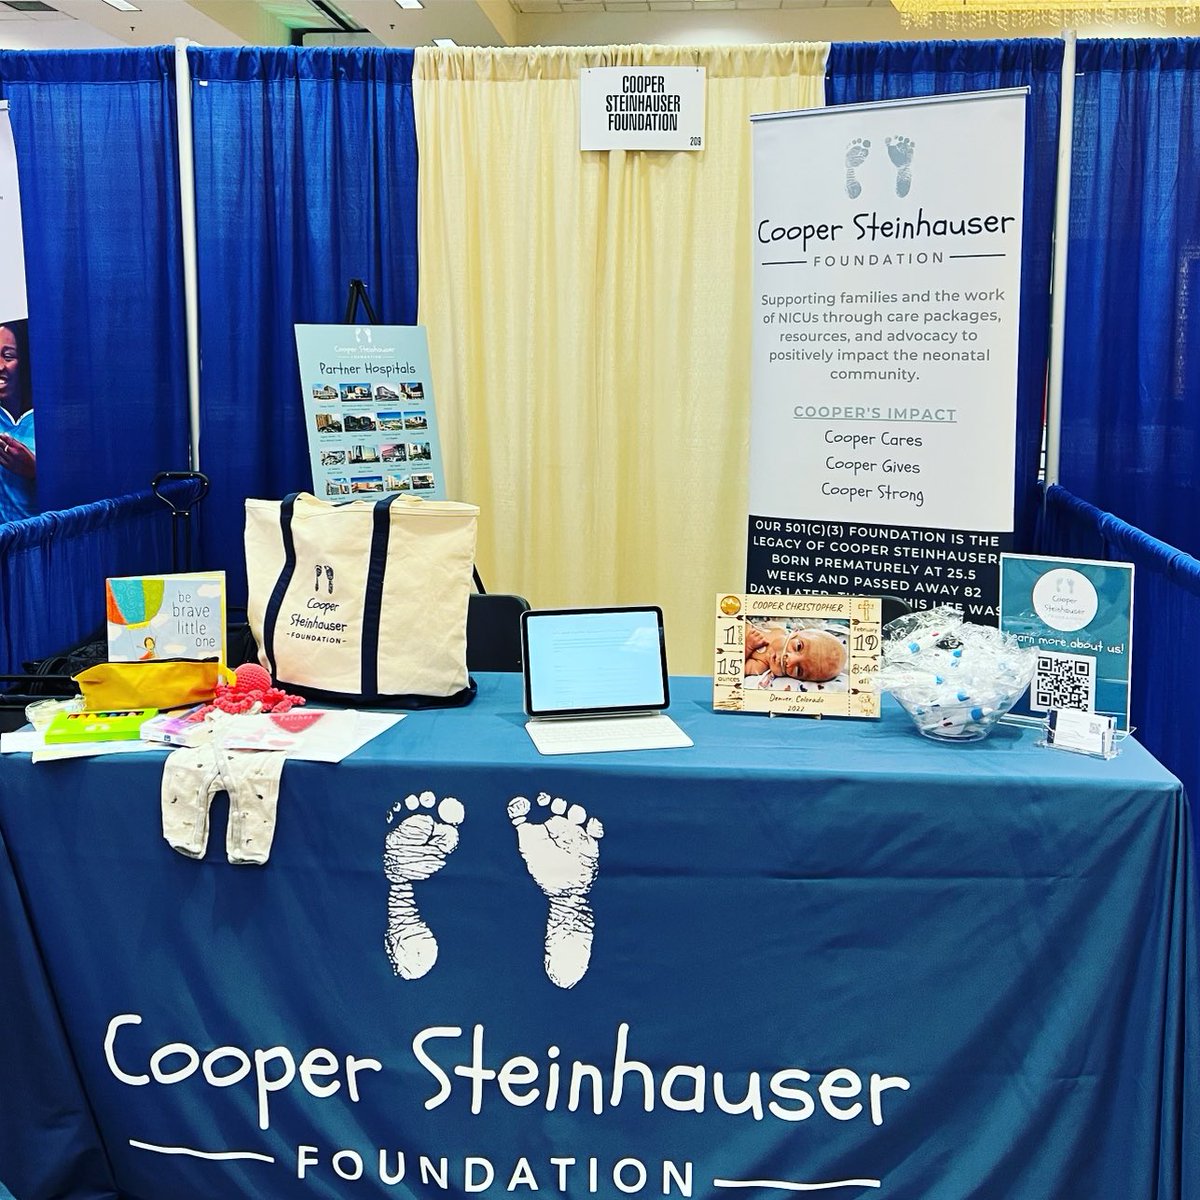 Calling all @NeonatalNurses attending #nanninanaheim to visit @CSFoundation22 at booth #209. We provide curated care bags to newly admitted families. Come say hi and let’s bring bags to your NICU!